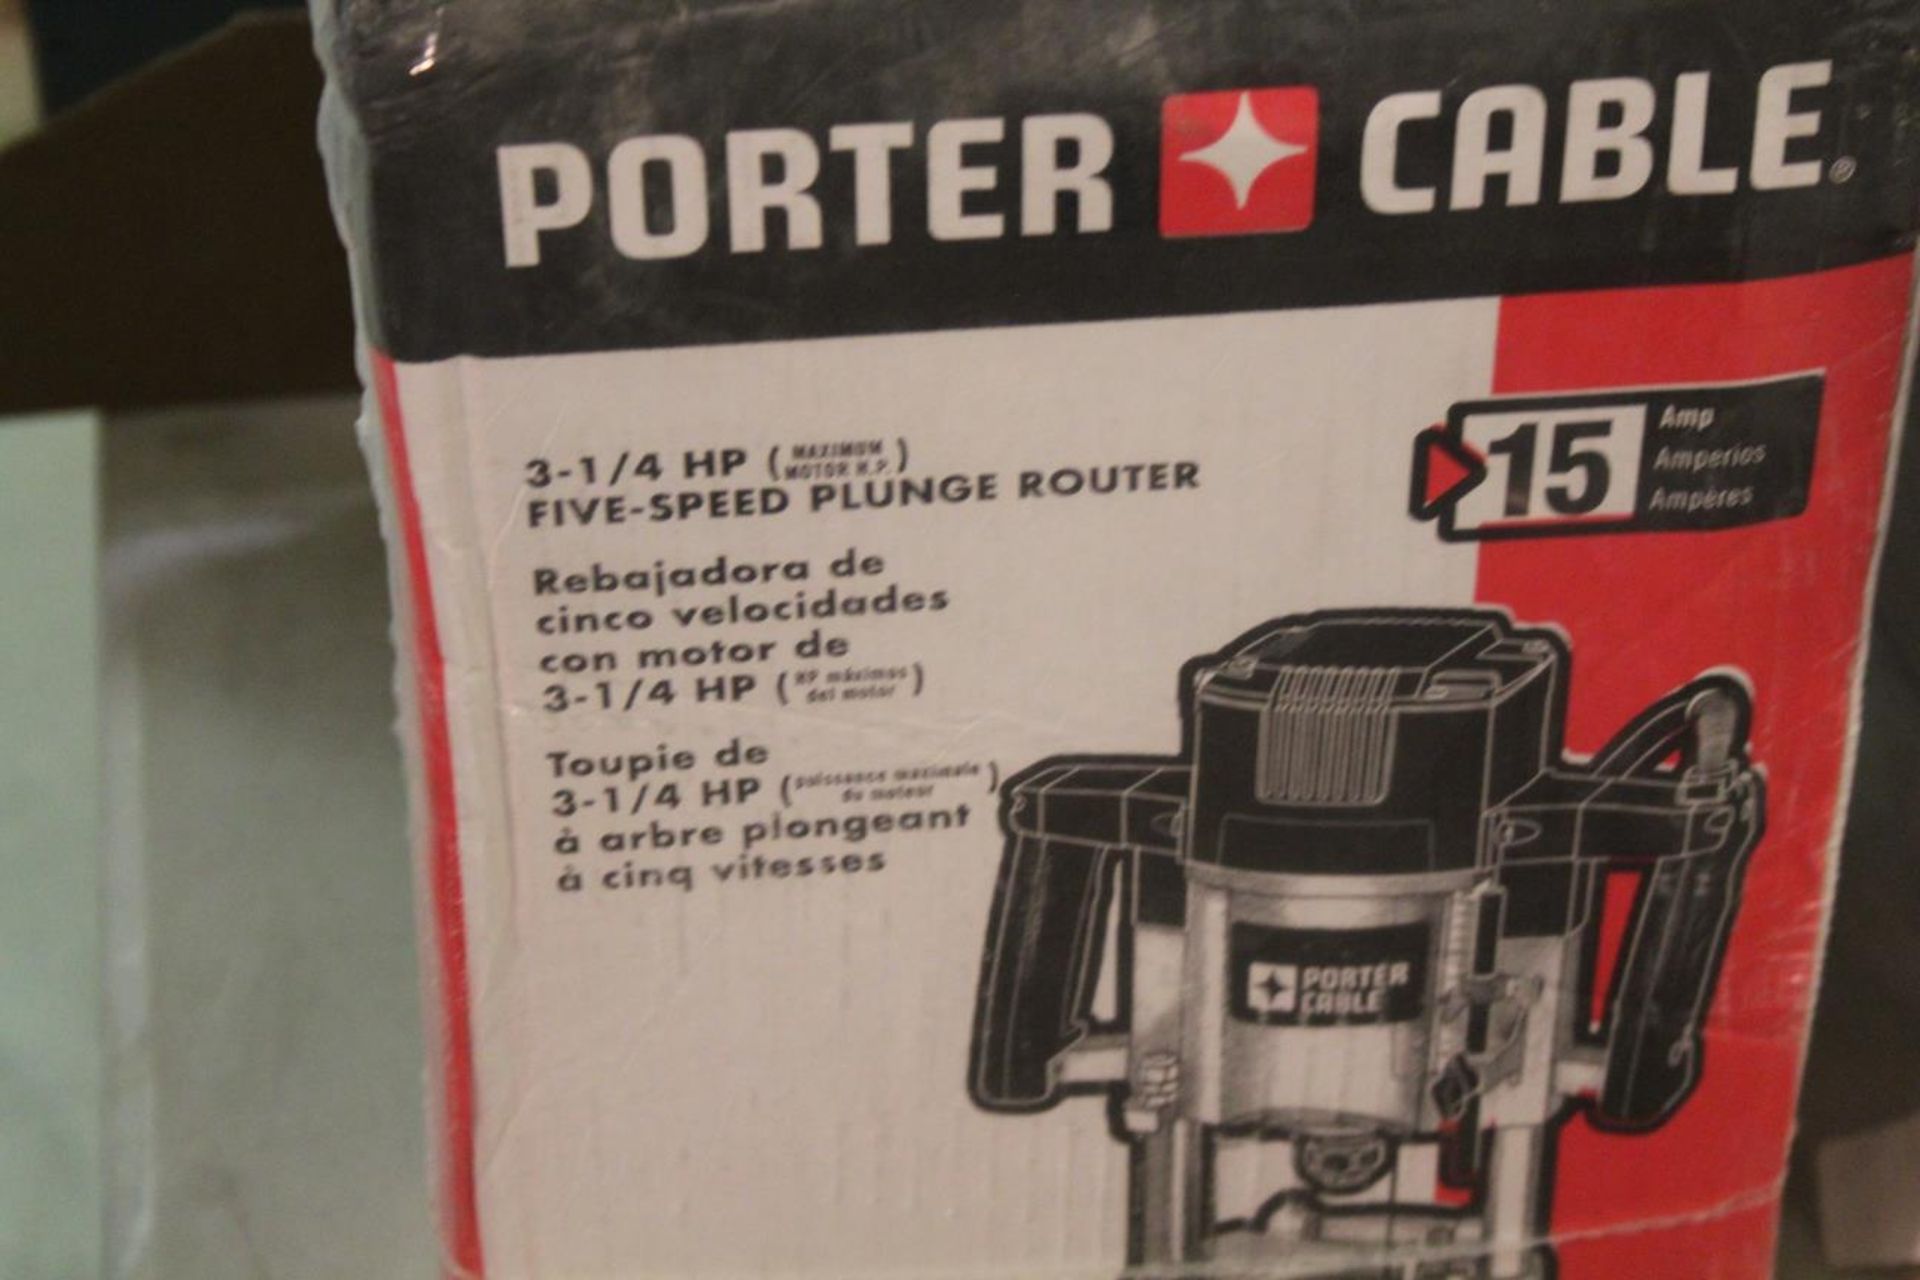 Porter Cable 7539 5 Speed Plunge Router, Sealed Box, 3 1/4 hp - Image 2 of 4